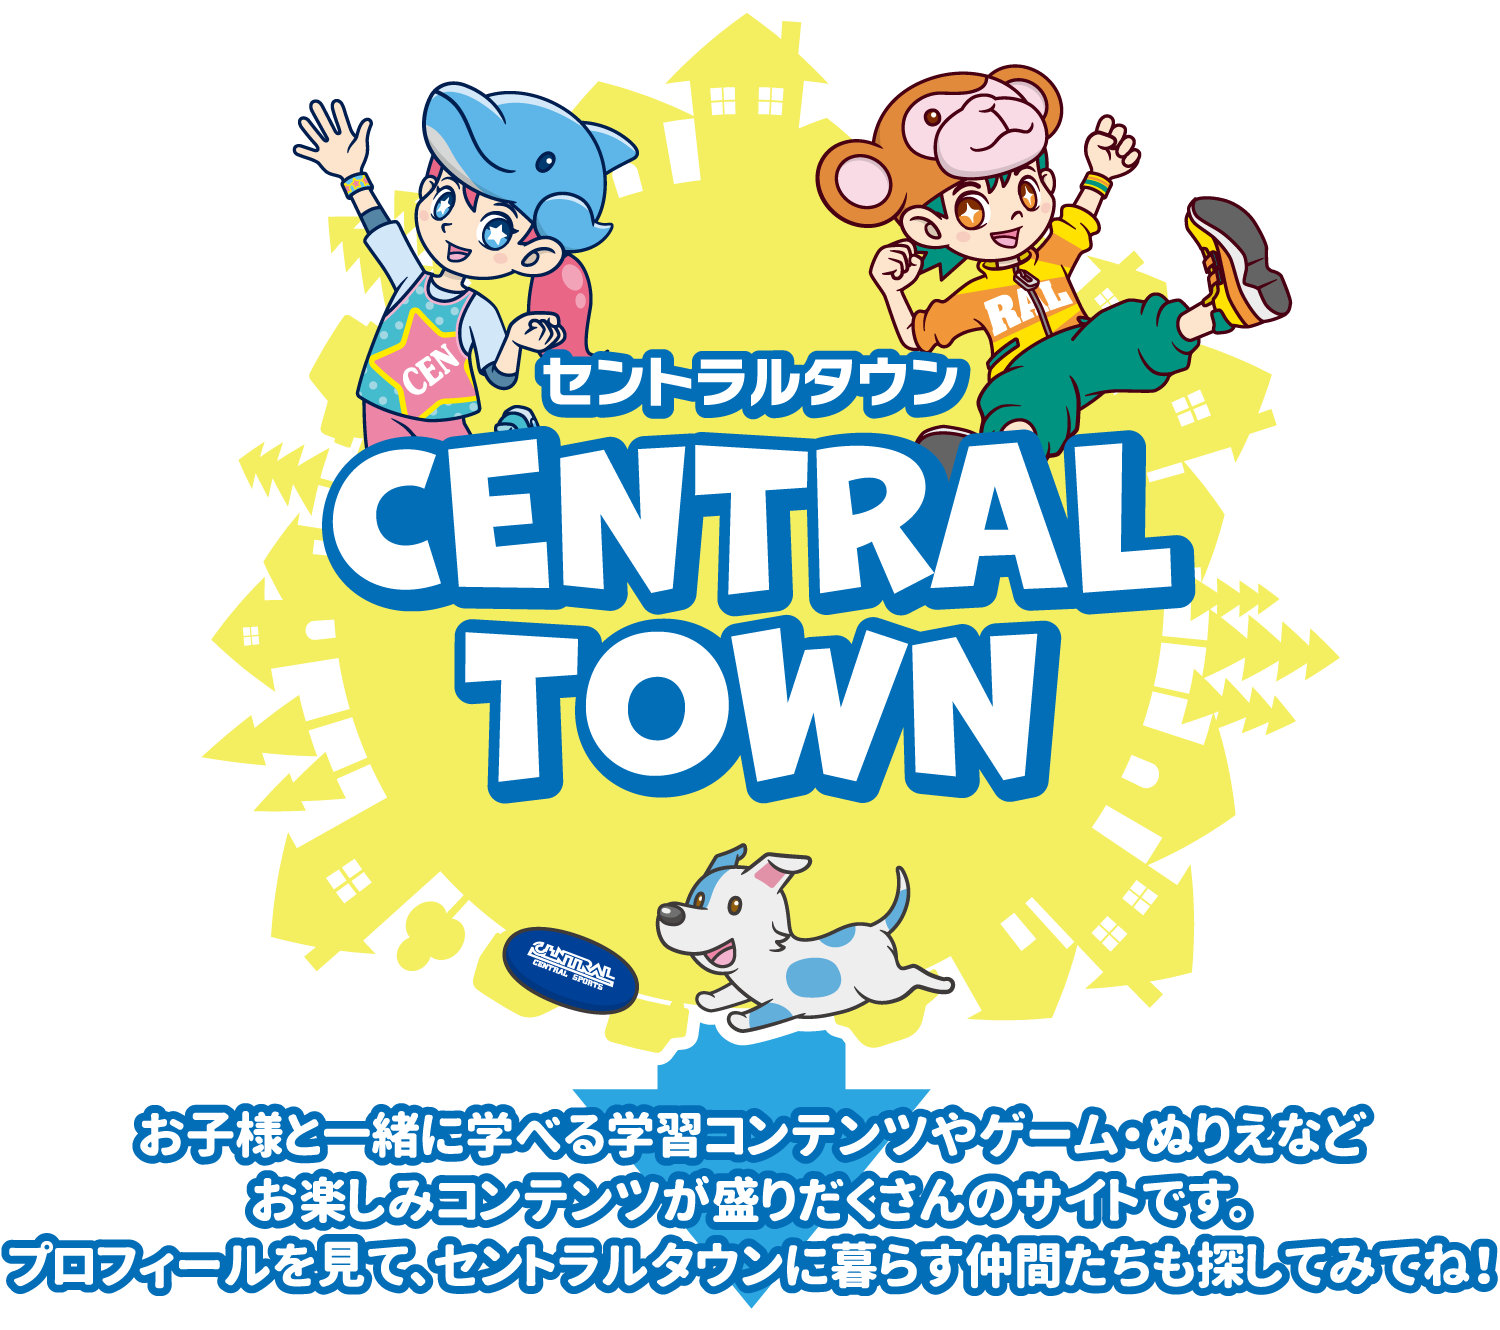 CENTRAL TOWN